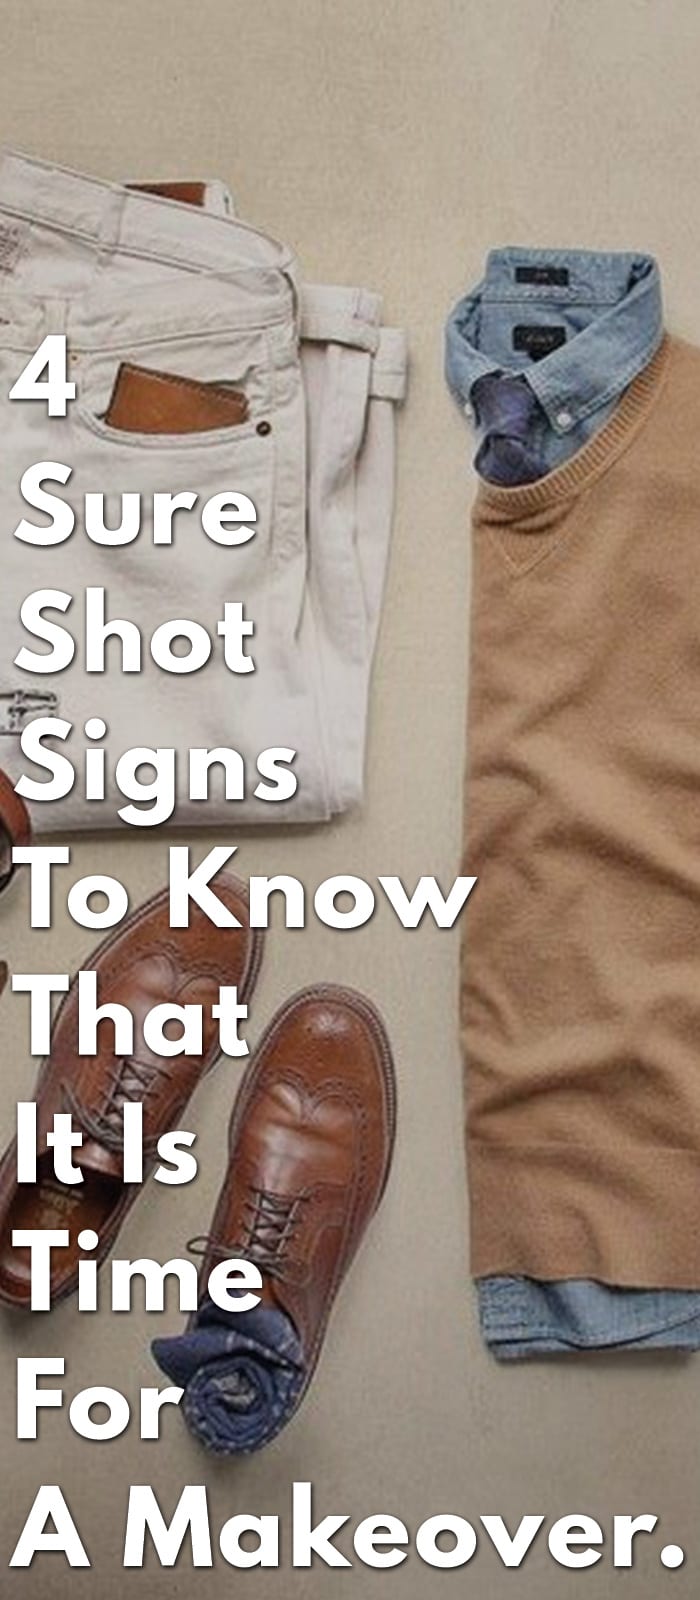 4-Sure-Shot-Signs-To-Know-That-It-Is-Time-For-A-Makeover.